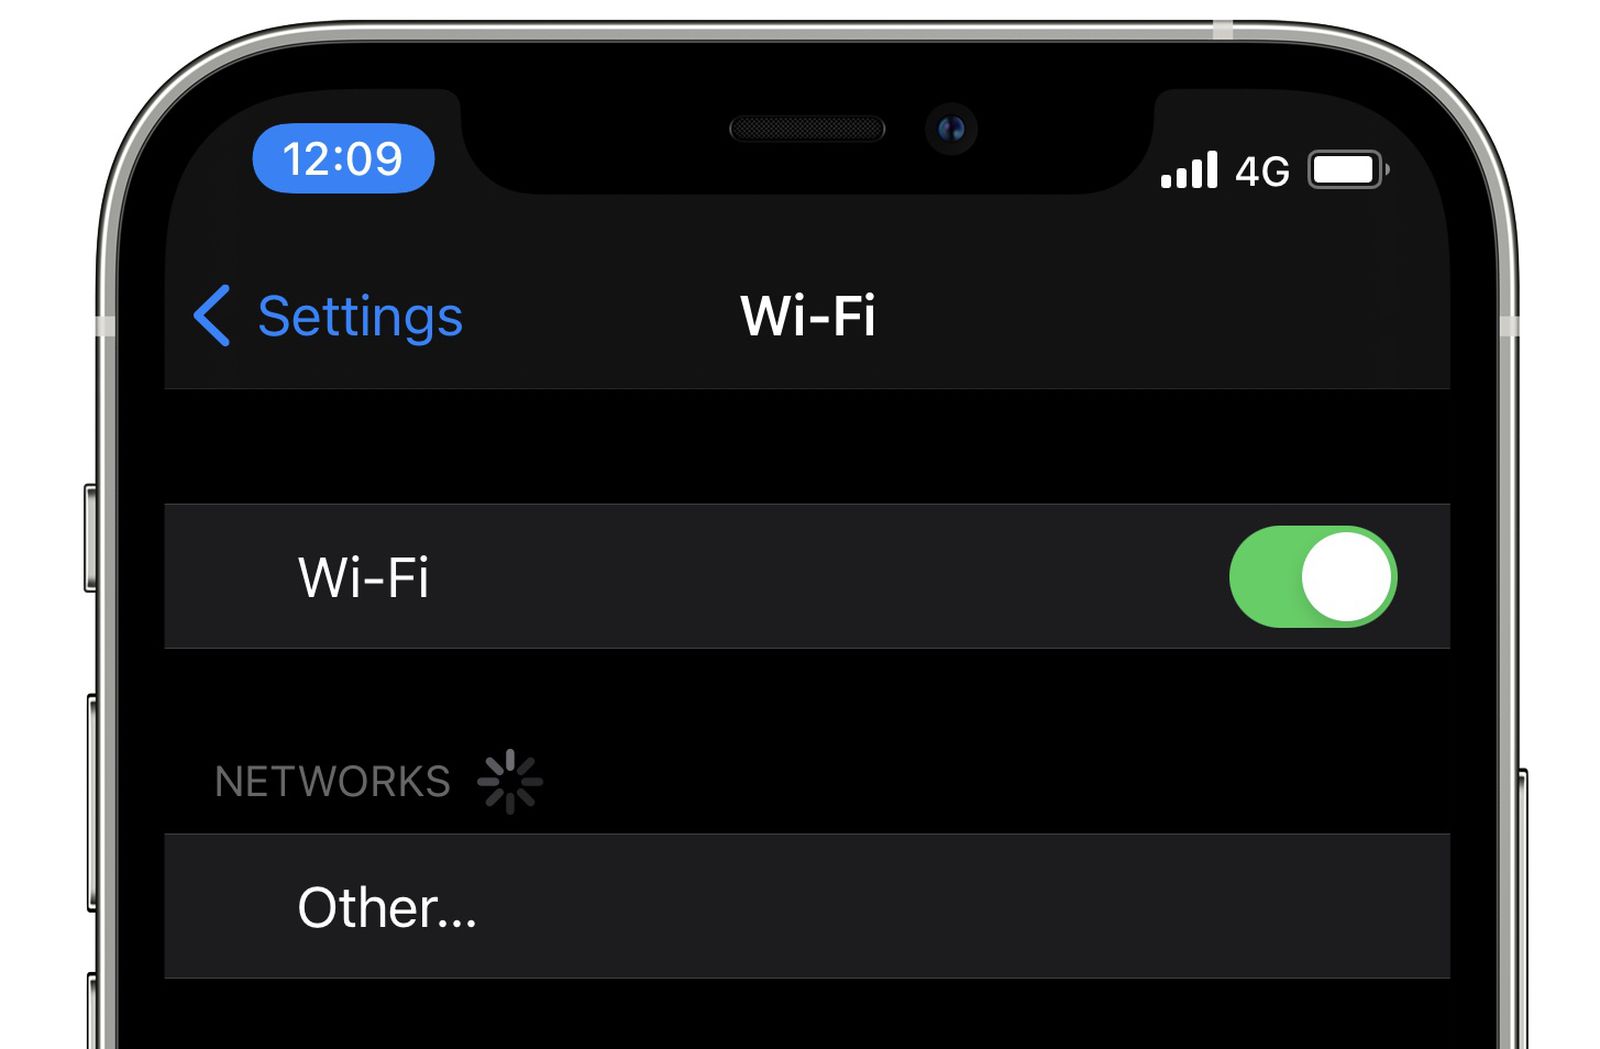 iOS Bug Causes Specific Network Name to Disable Wi-Fi on iPhones - MacRumors